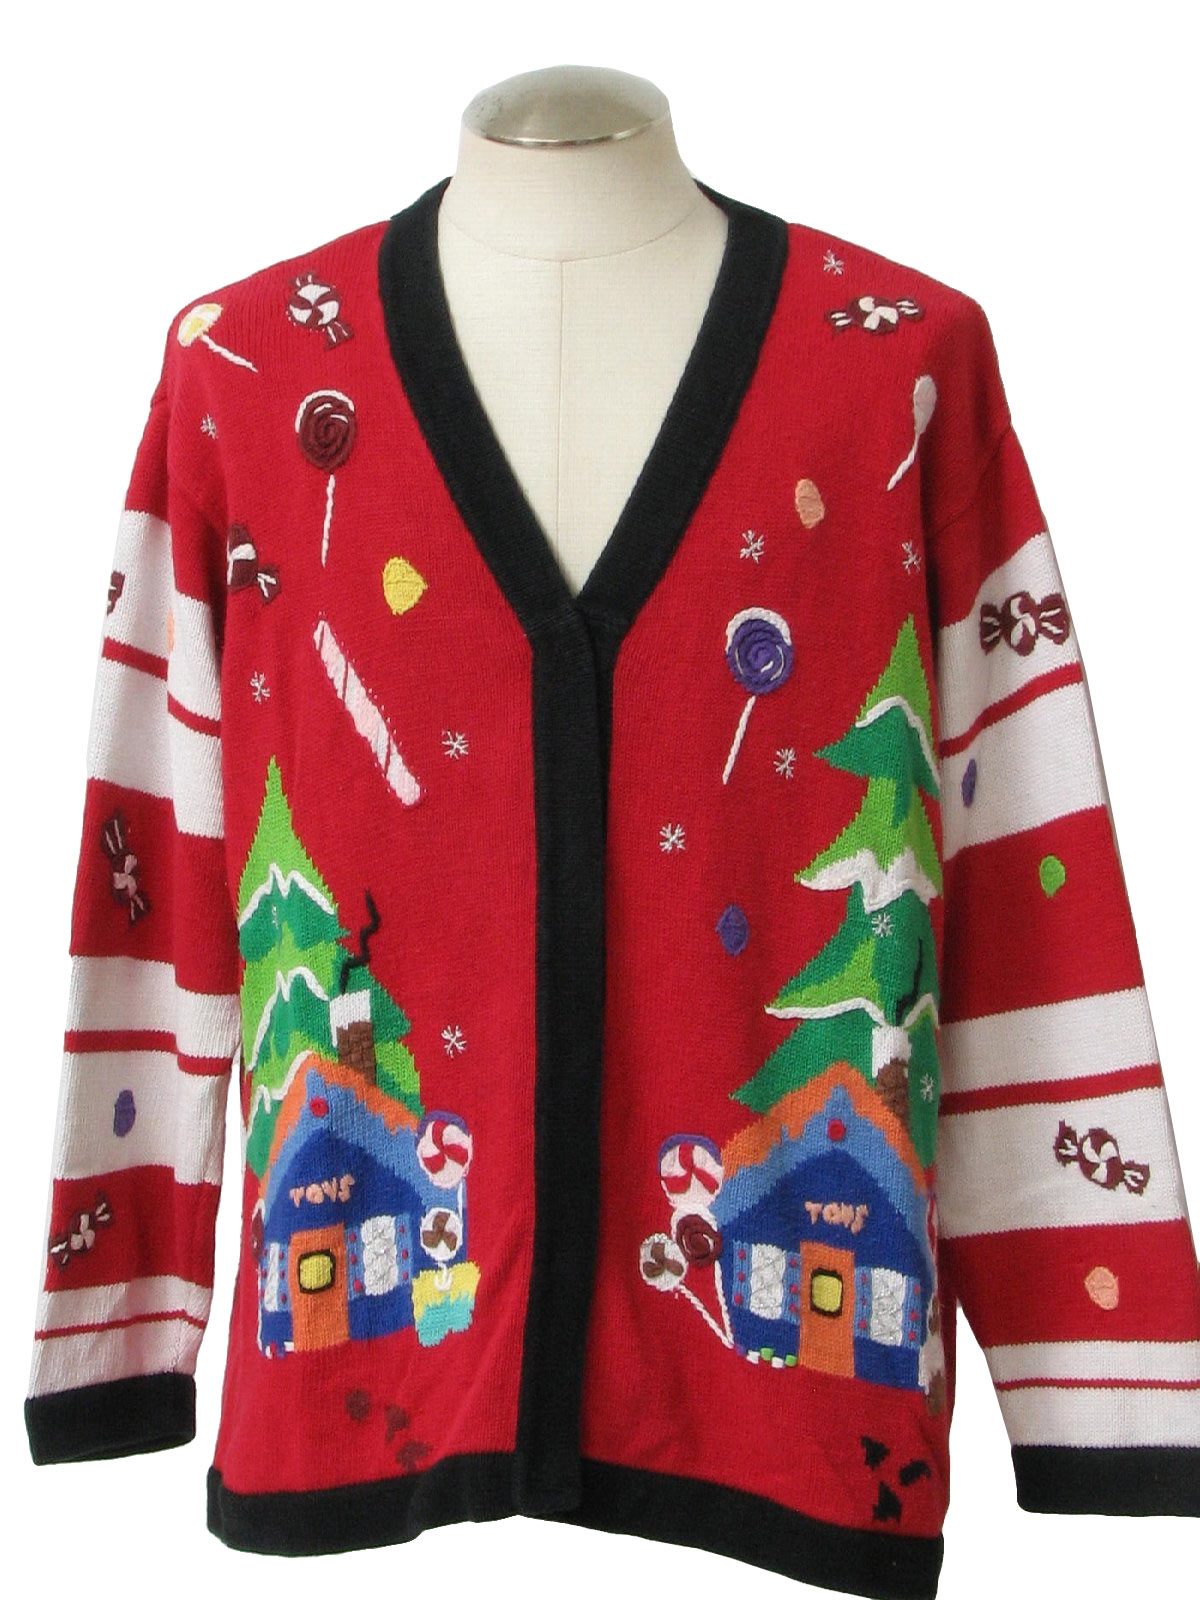 Ugly Christmas Cardigan Sweater: -Storybook Knits- Unisex red ...